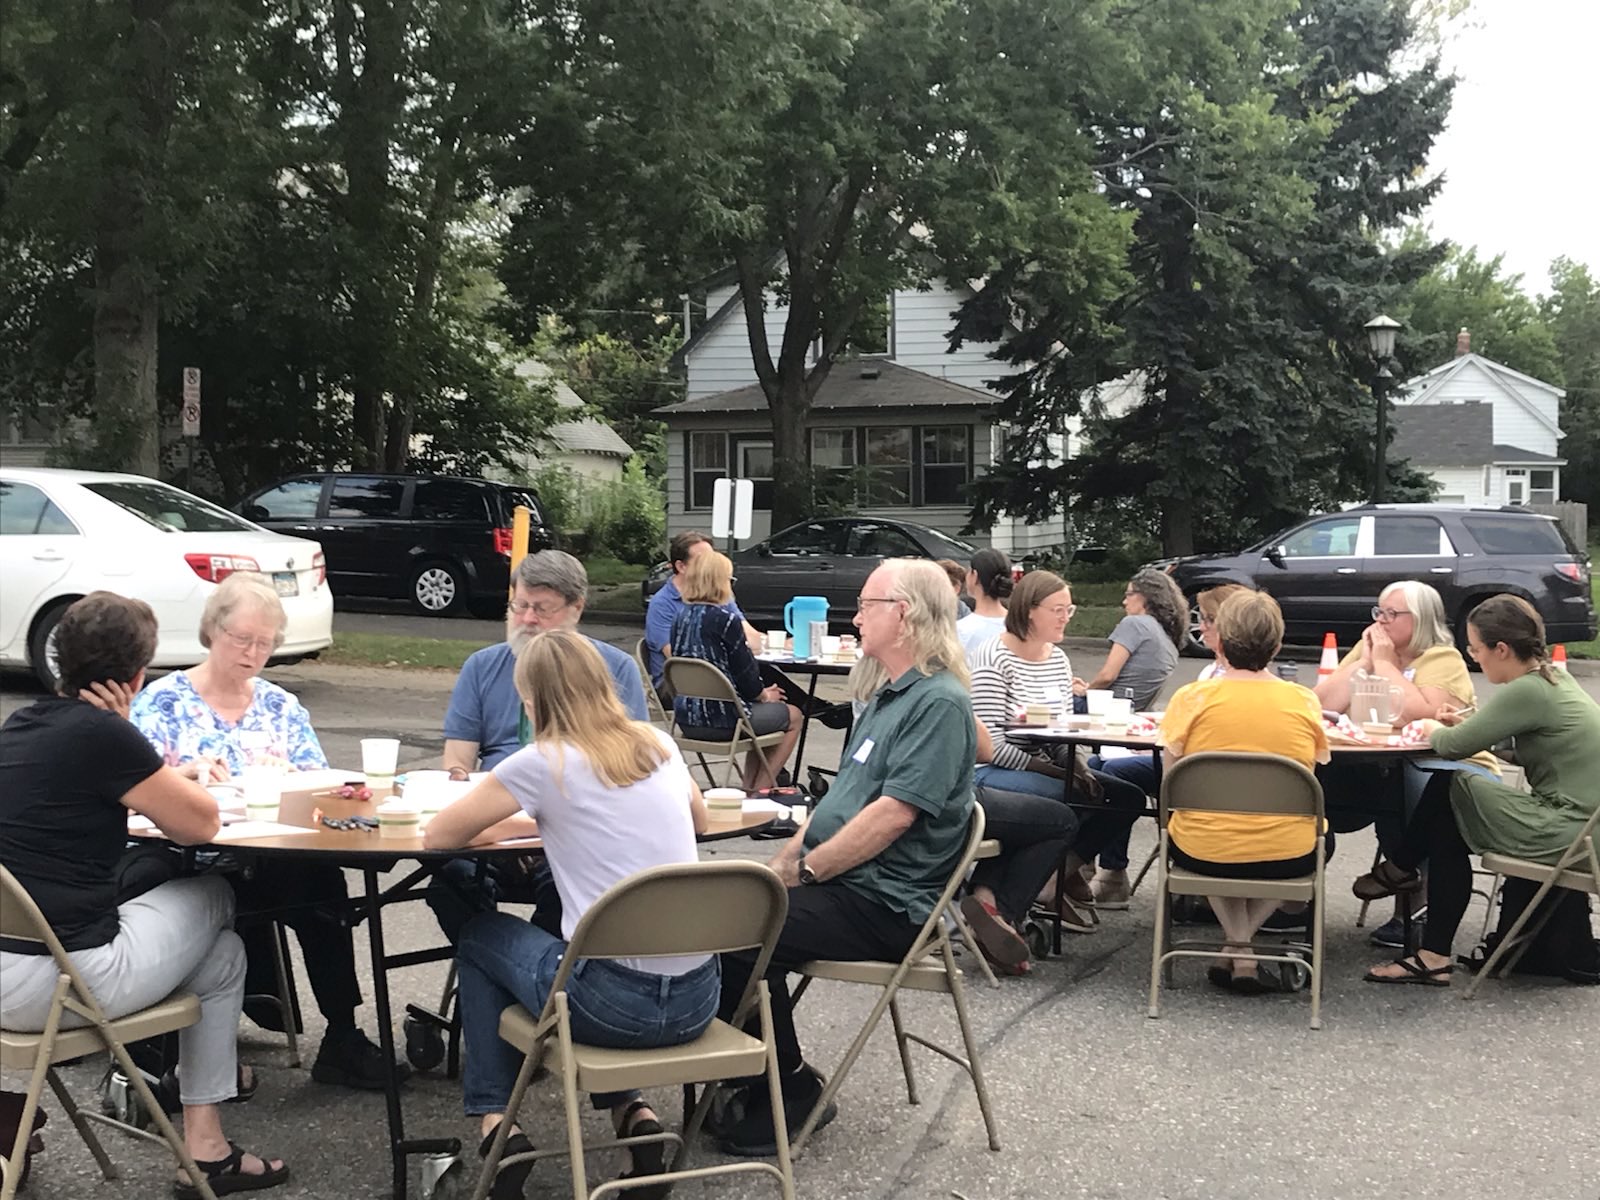 People sit at outdoor tables in a Respectful Conversation in Saint Paul